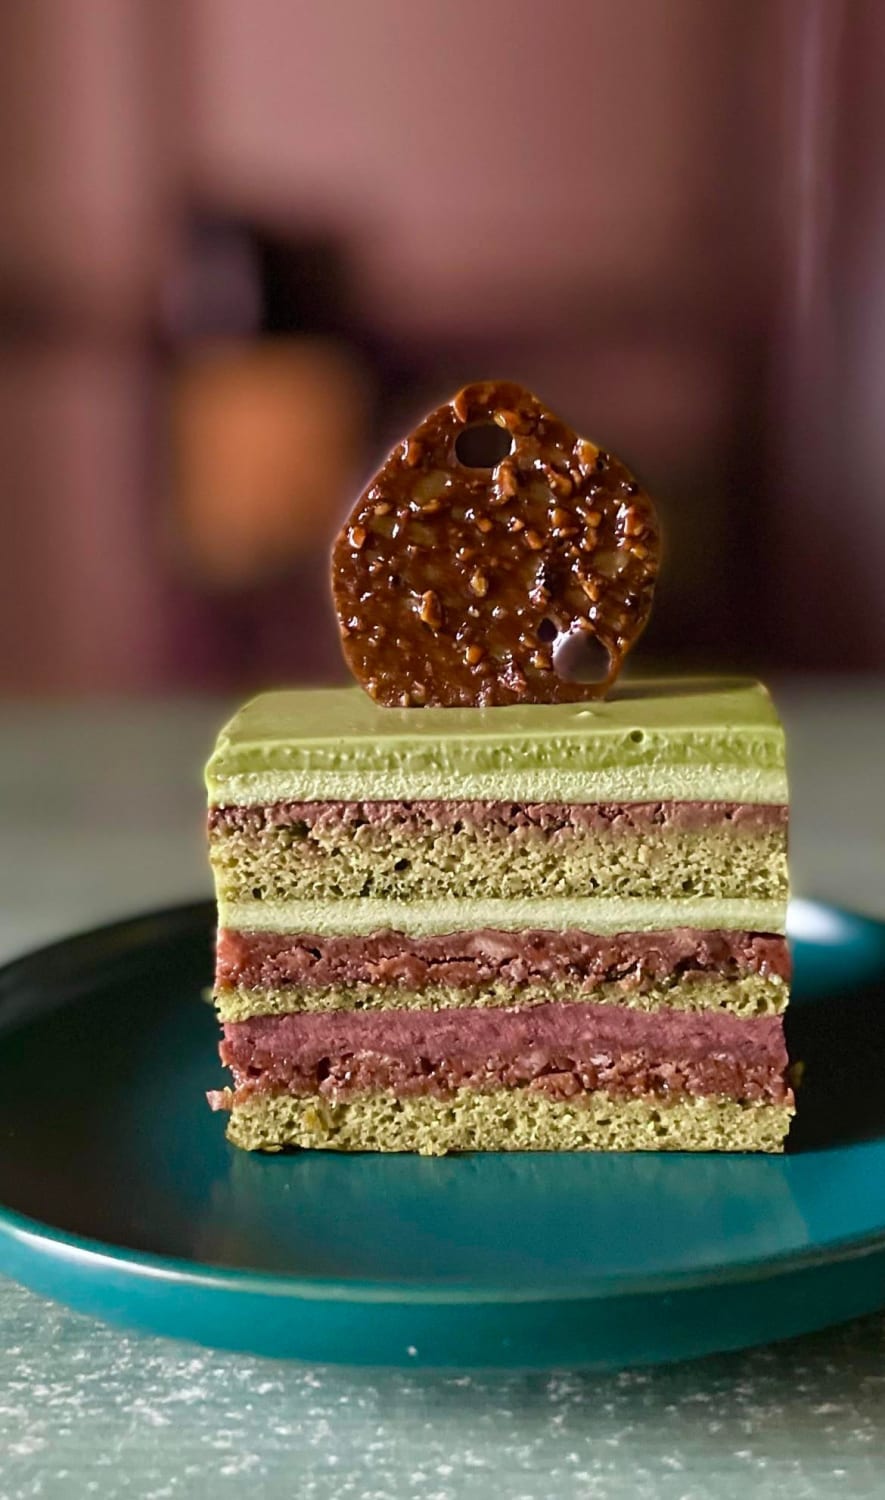 Matcha Opera cake that I made from scratch down to the feuilletine